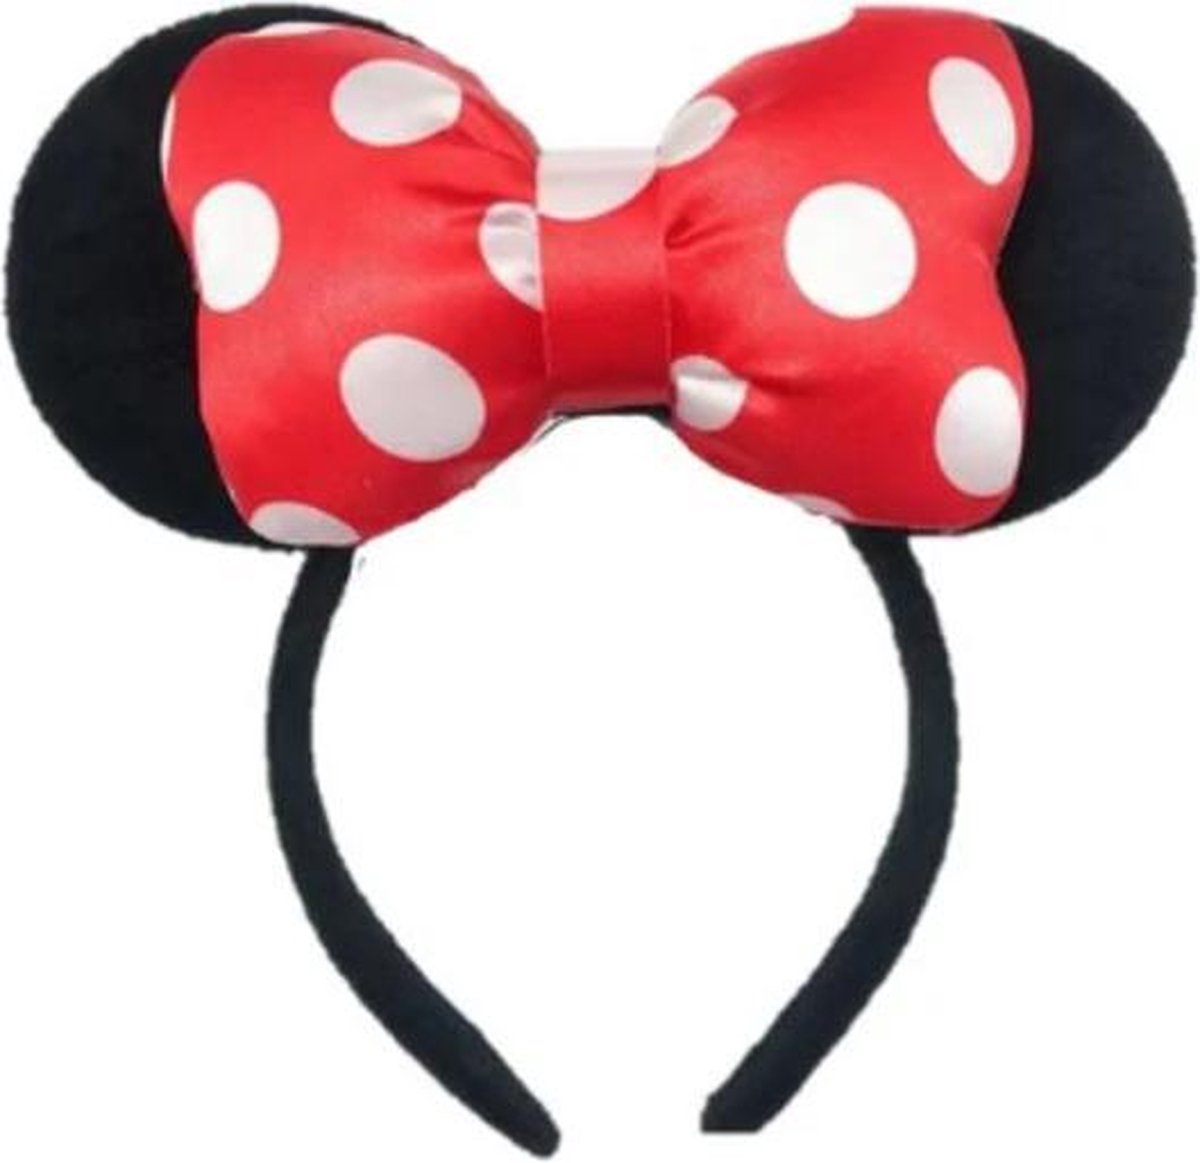 Minnie Mouse, Mickey Mouse, diadeem, luxe, 3D, rood stippen | bol.com